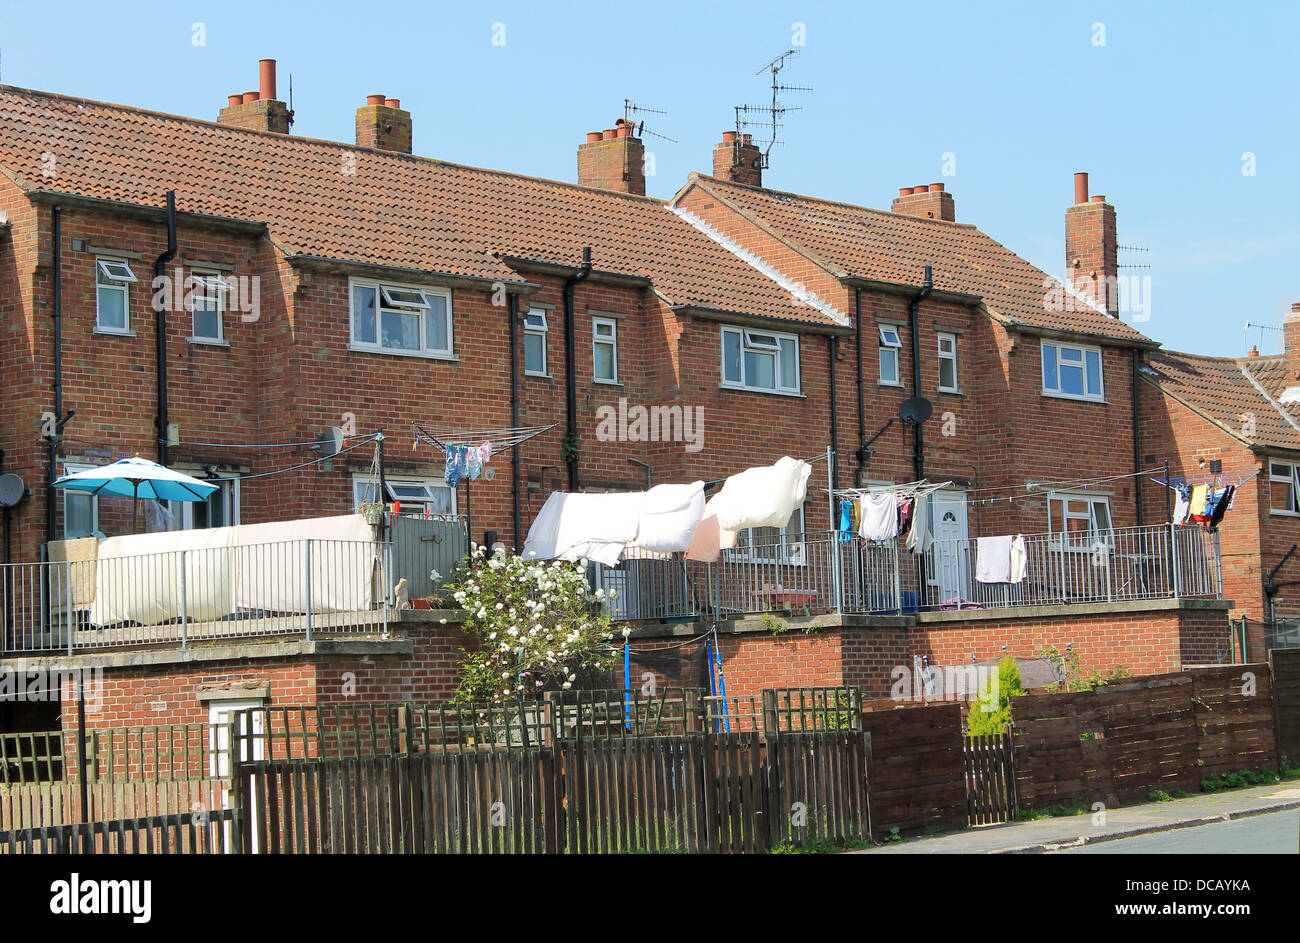 Rear view of modern terrace houses with washing drying in back yard. Stock Photo